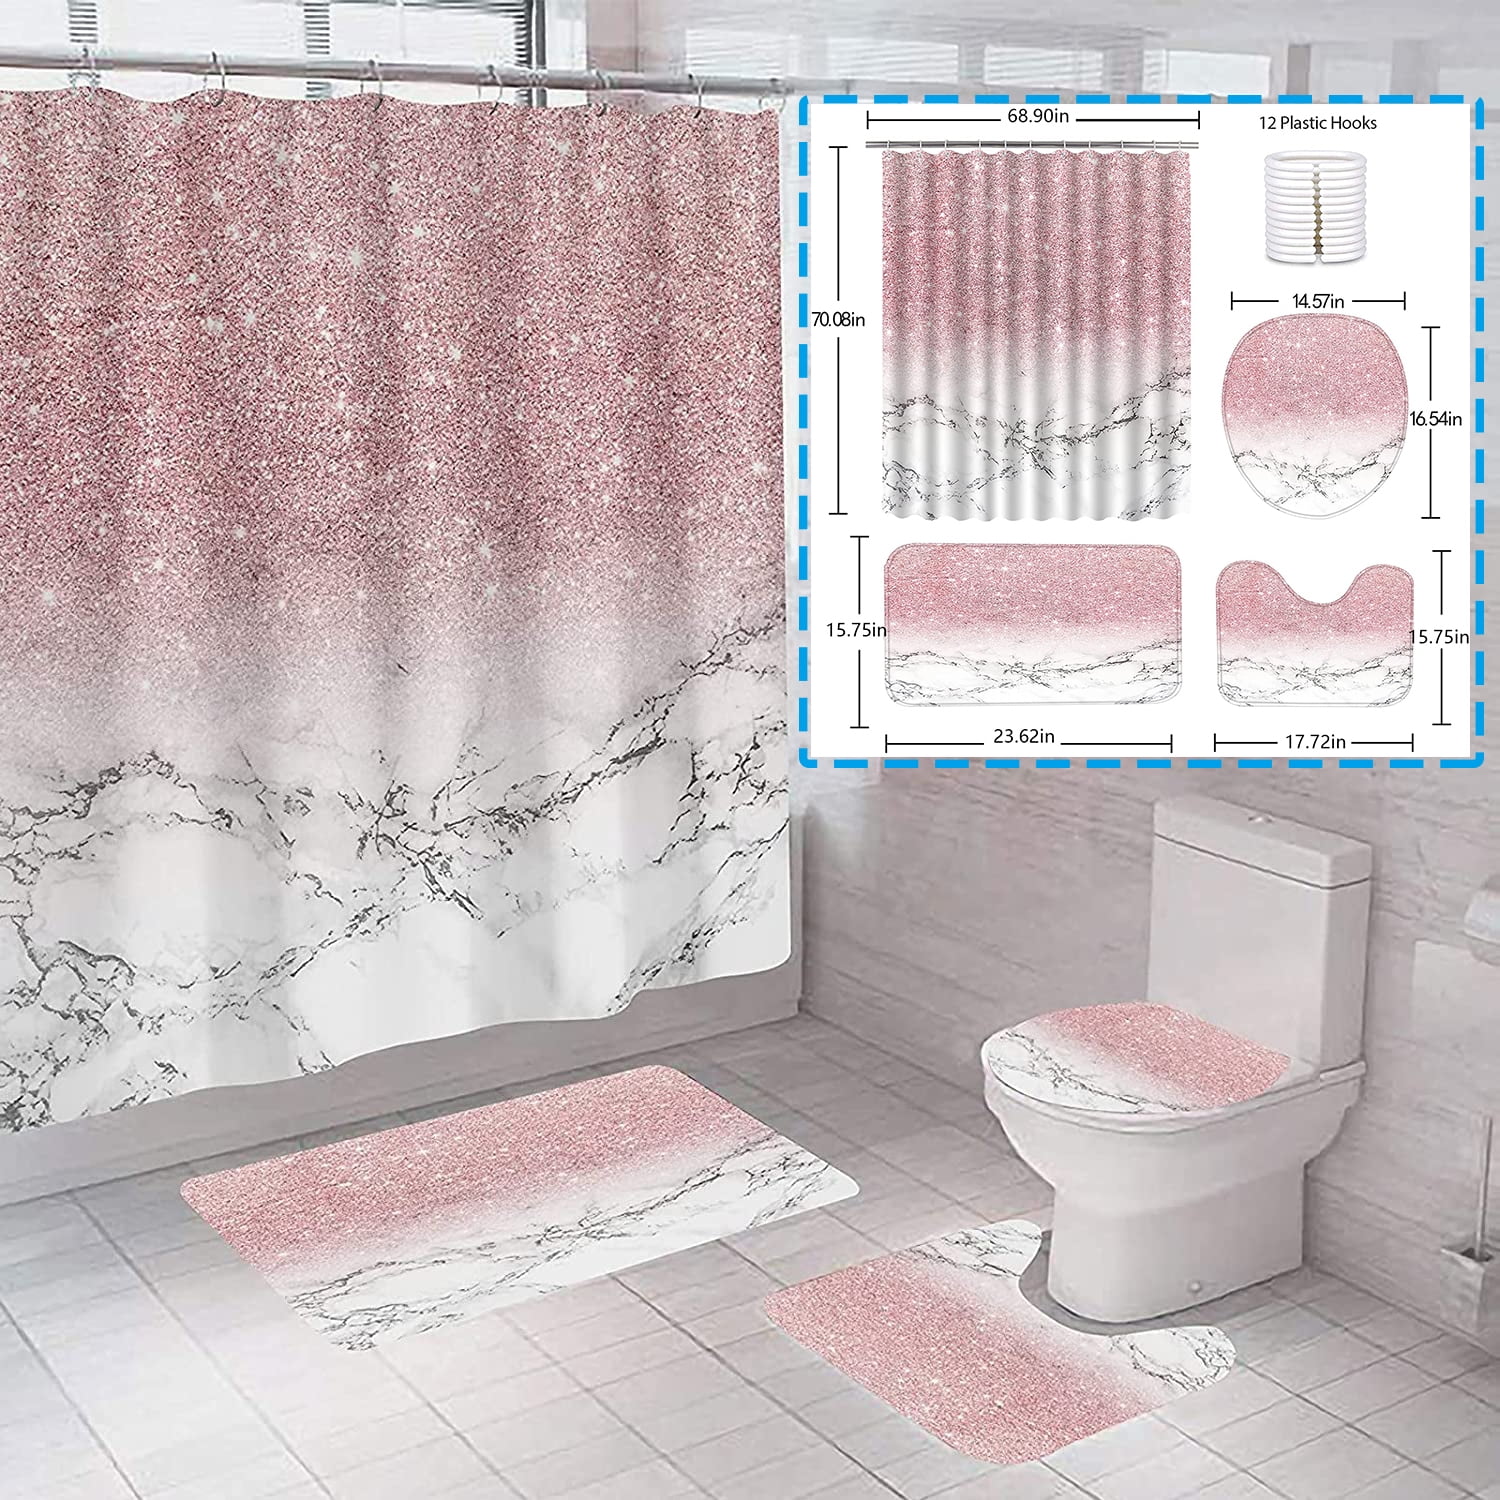 Details about   Retro Steam Train In Snow Forest Shower Curtain Toilet Cover Rug Mat Contour Rug 